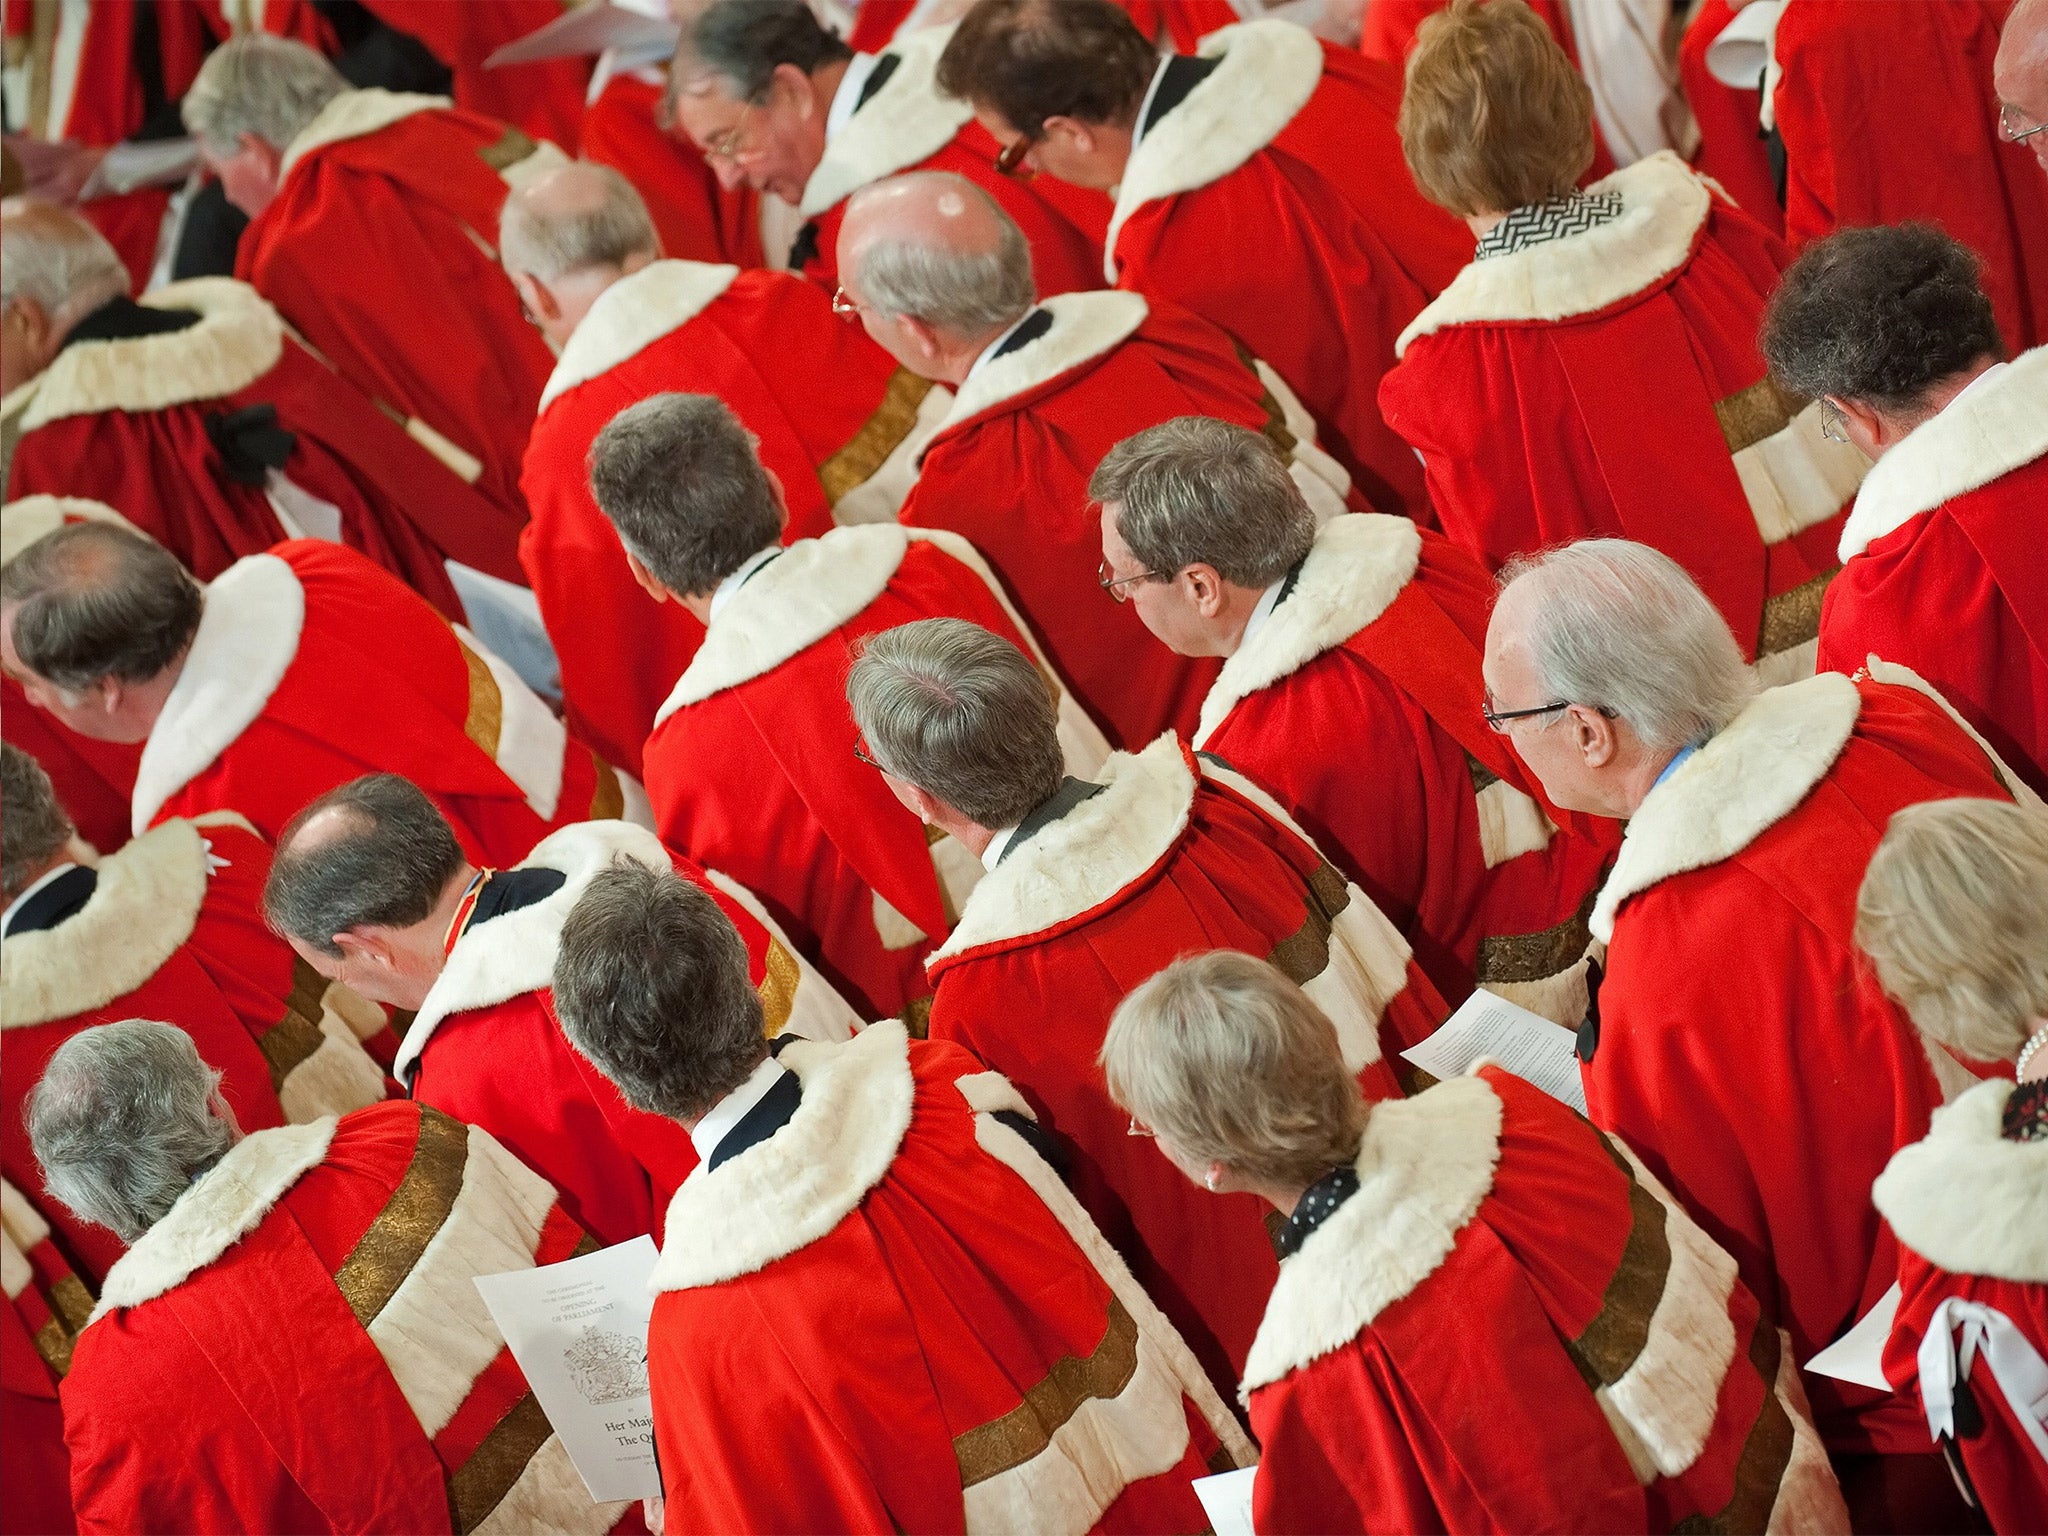 &#13;
Tories are heavily outnumbered in the House of Lords &#13;